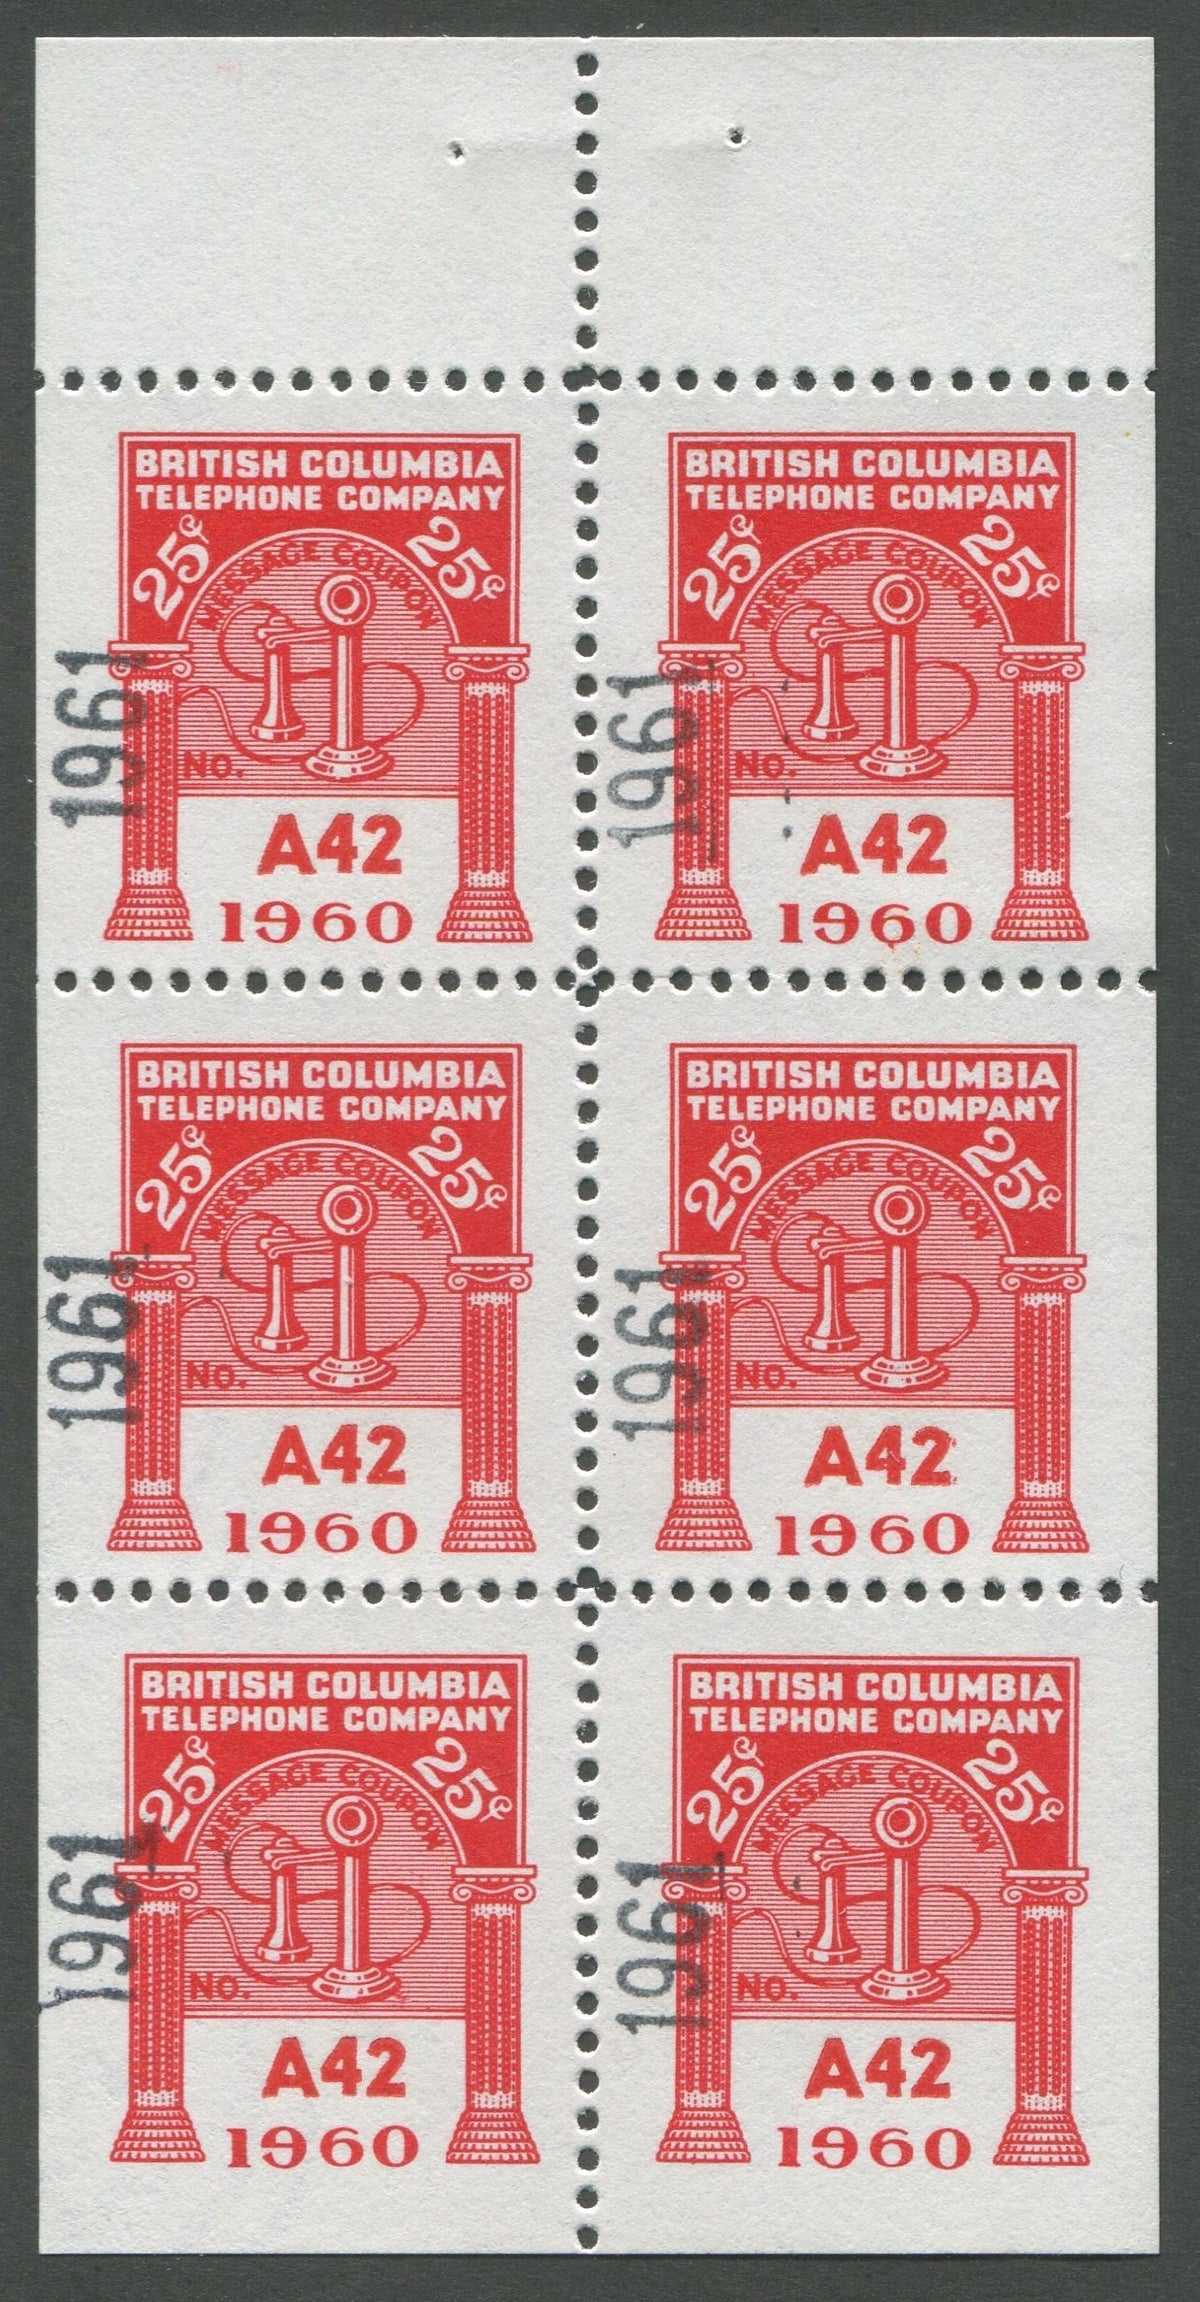 0292BC1708 - BCT194 - Mint Booklet Pane, Watermarked